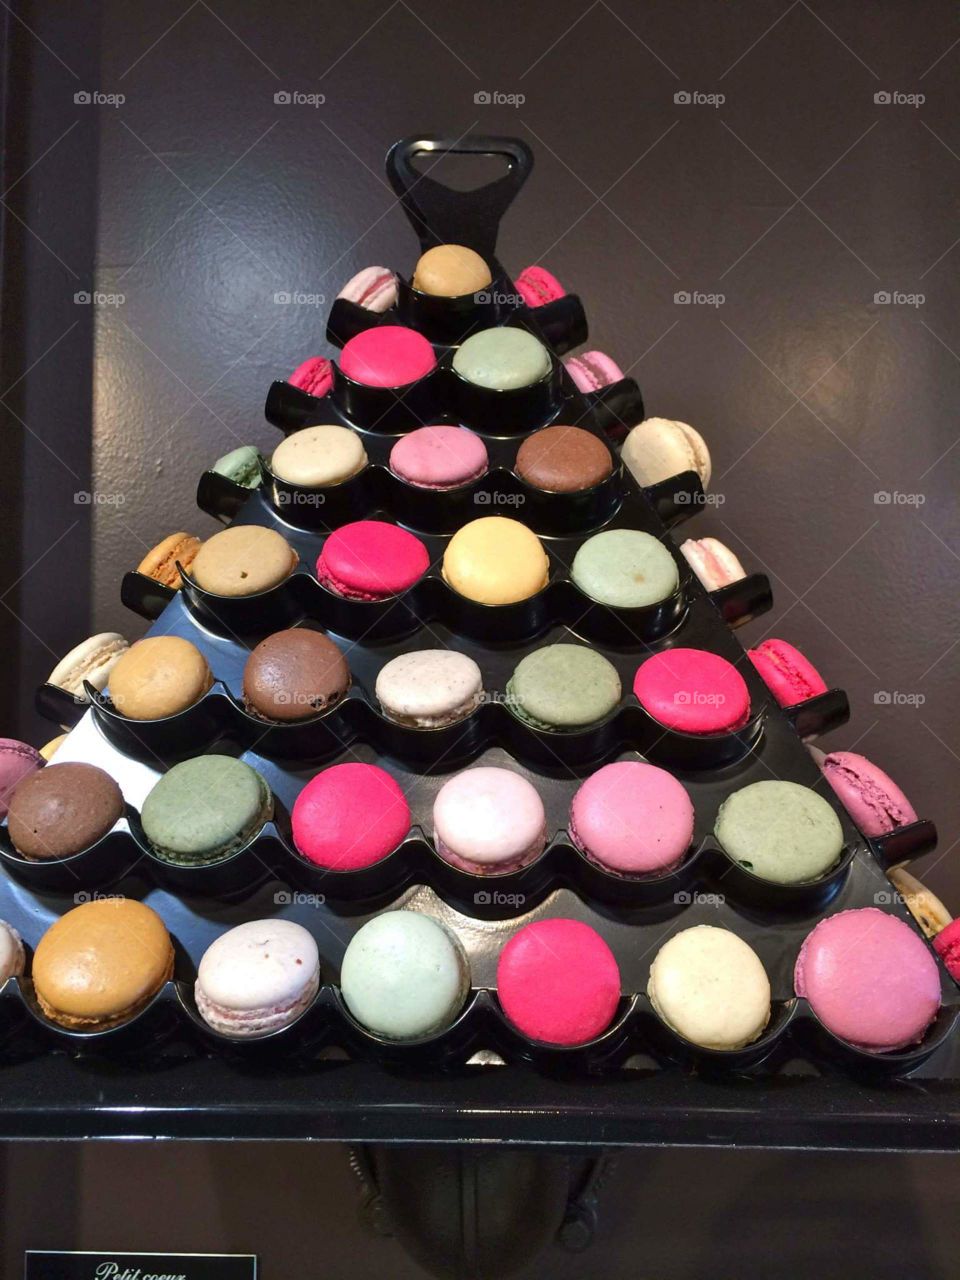 A Mountain of French Macarons on the streets of Paris!